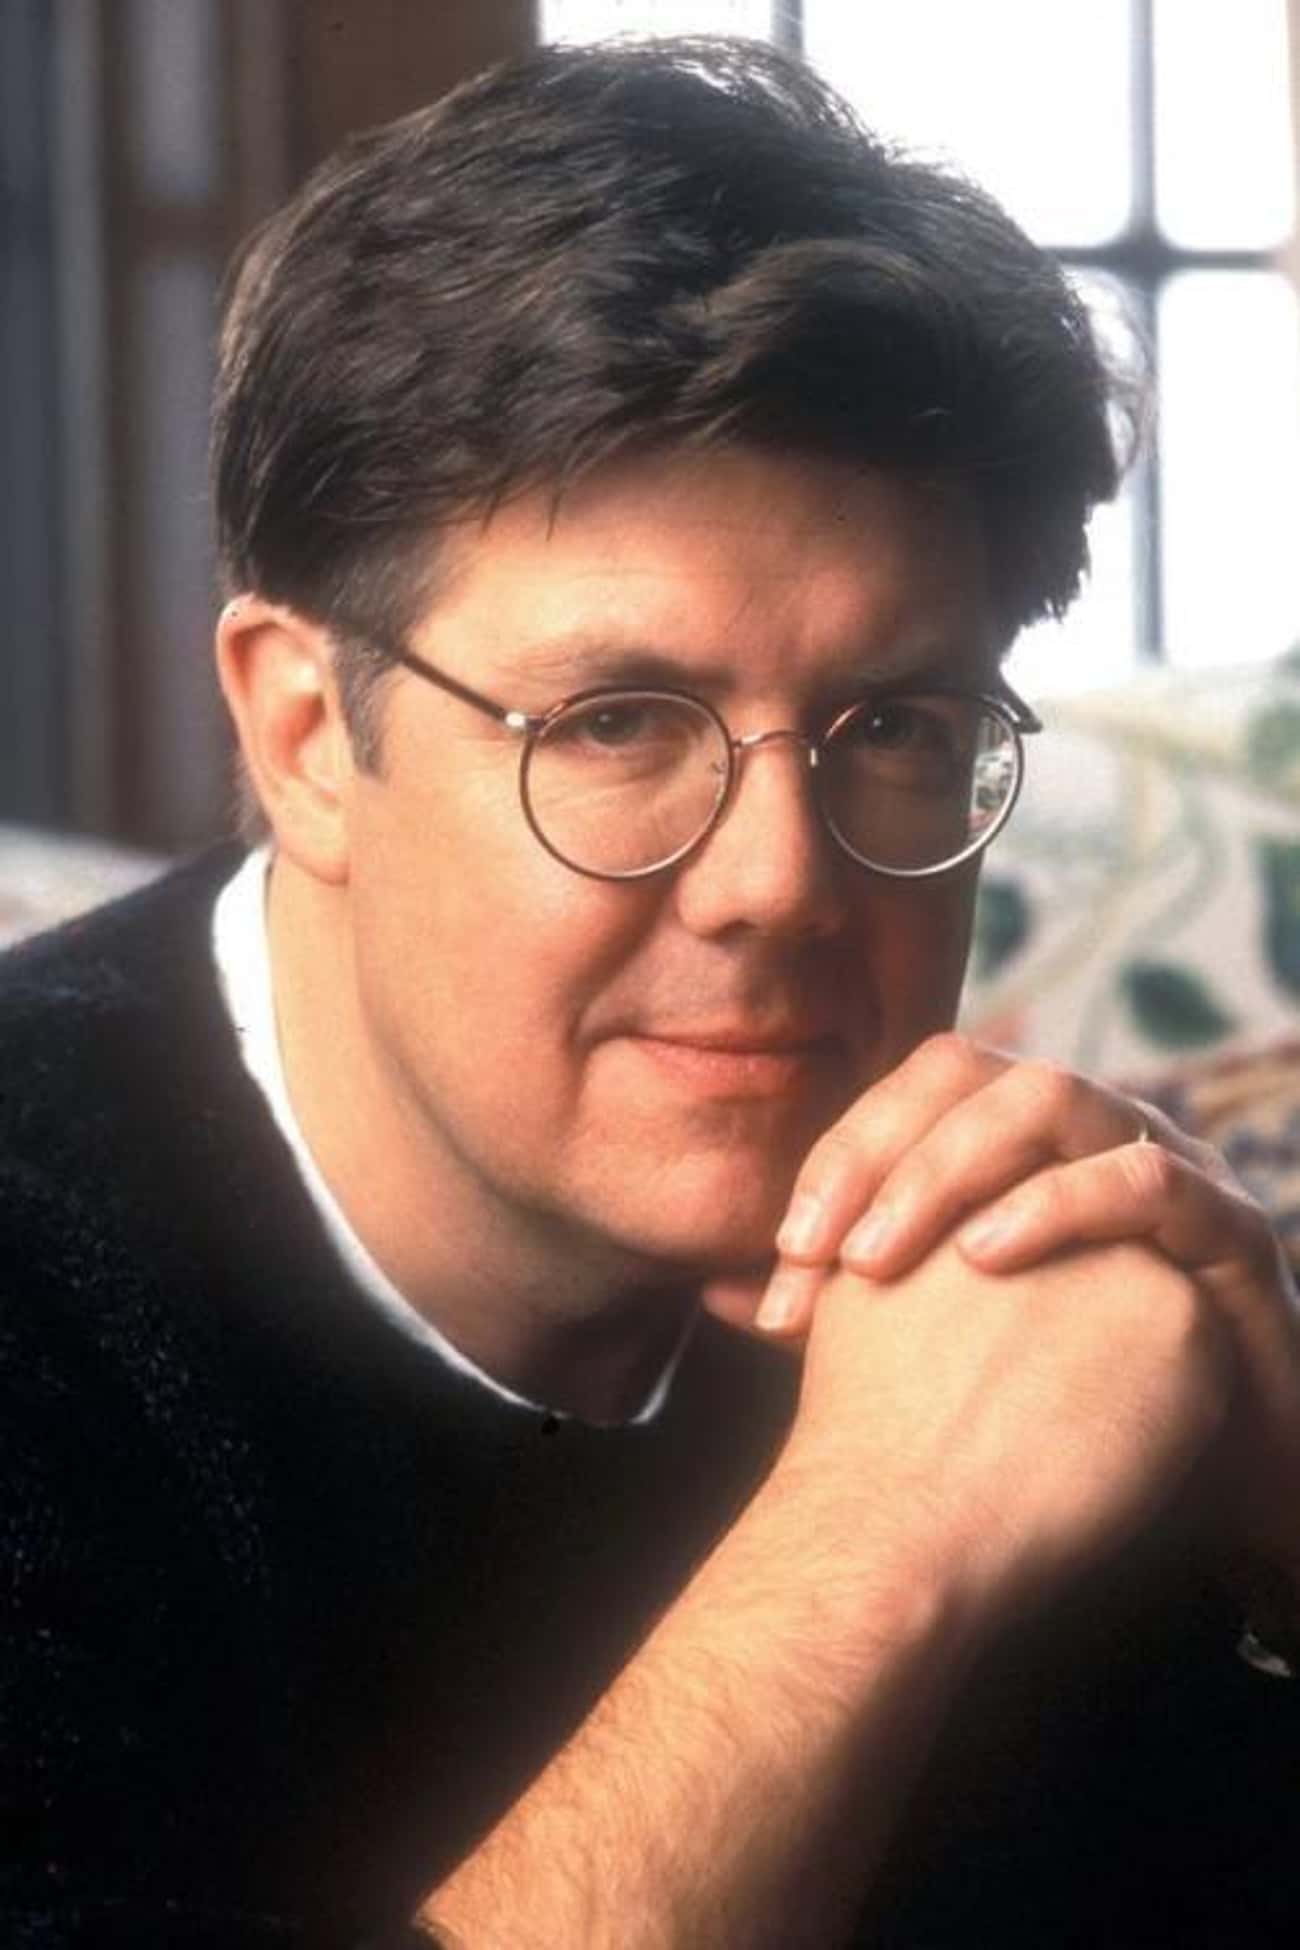 John Hughes Came Up With The Idea, But Warned The Producers Not To Credit Him Or They’d Have To Pay $1 Million